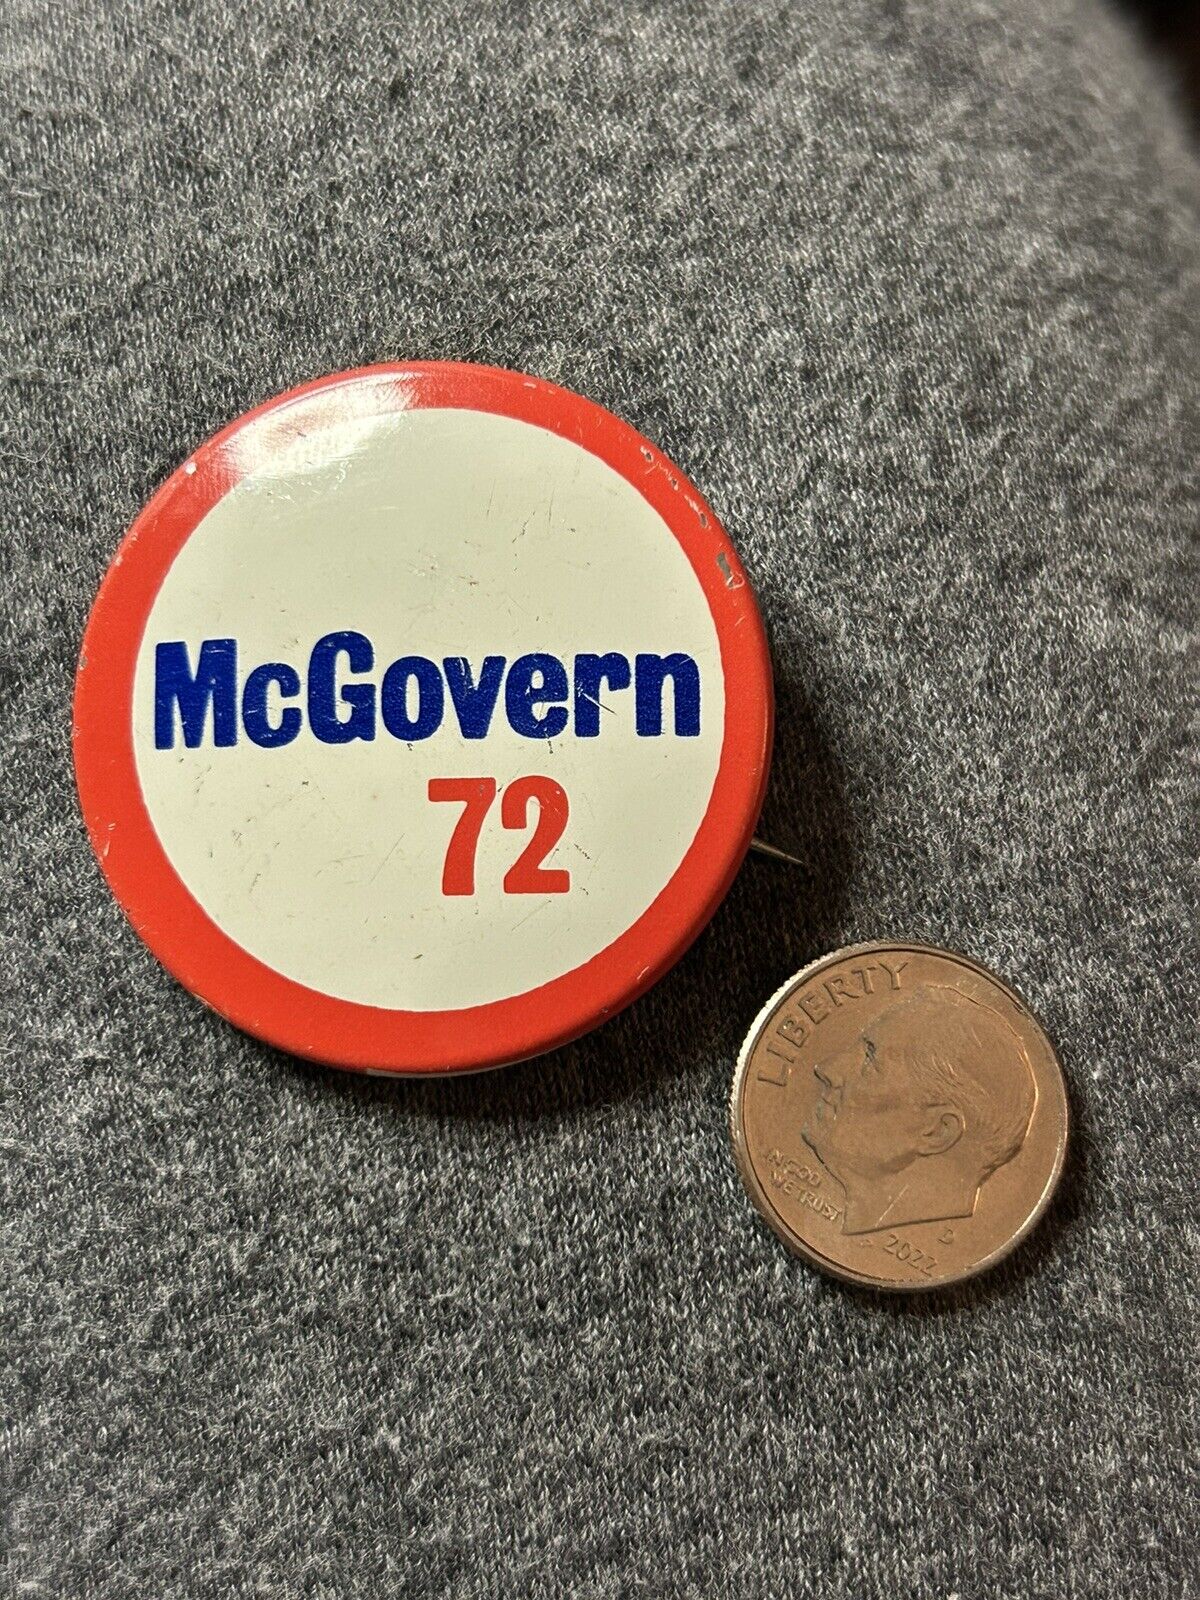 Vintage McGovern 1972 Presidential Candidate Pinback Button Pin USA 🇺🇸